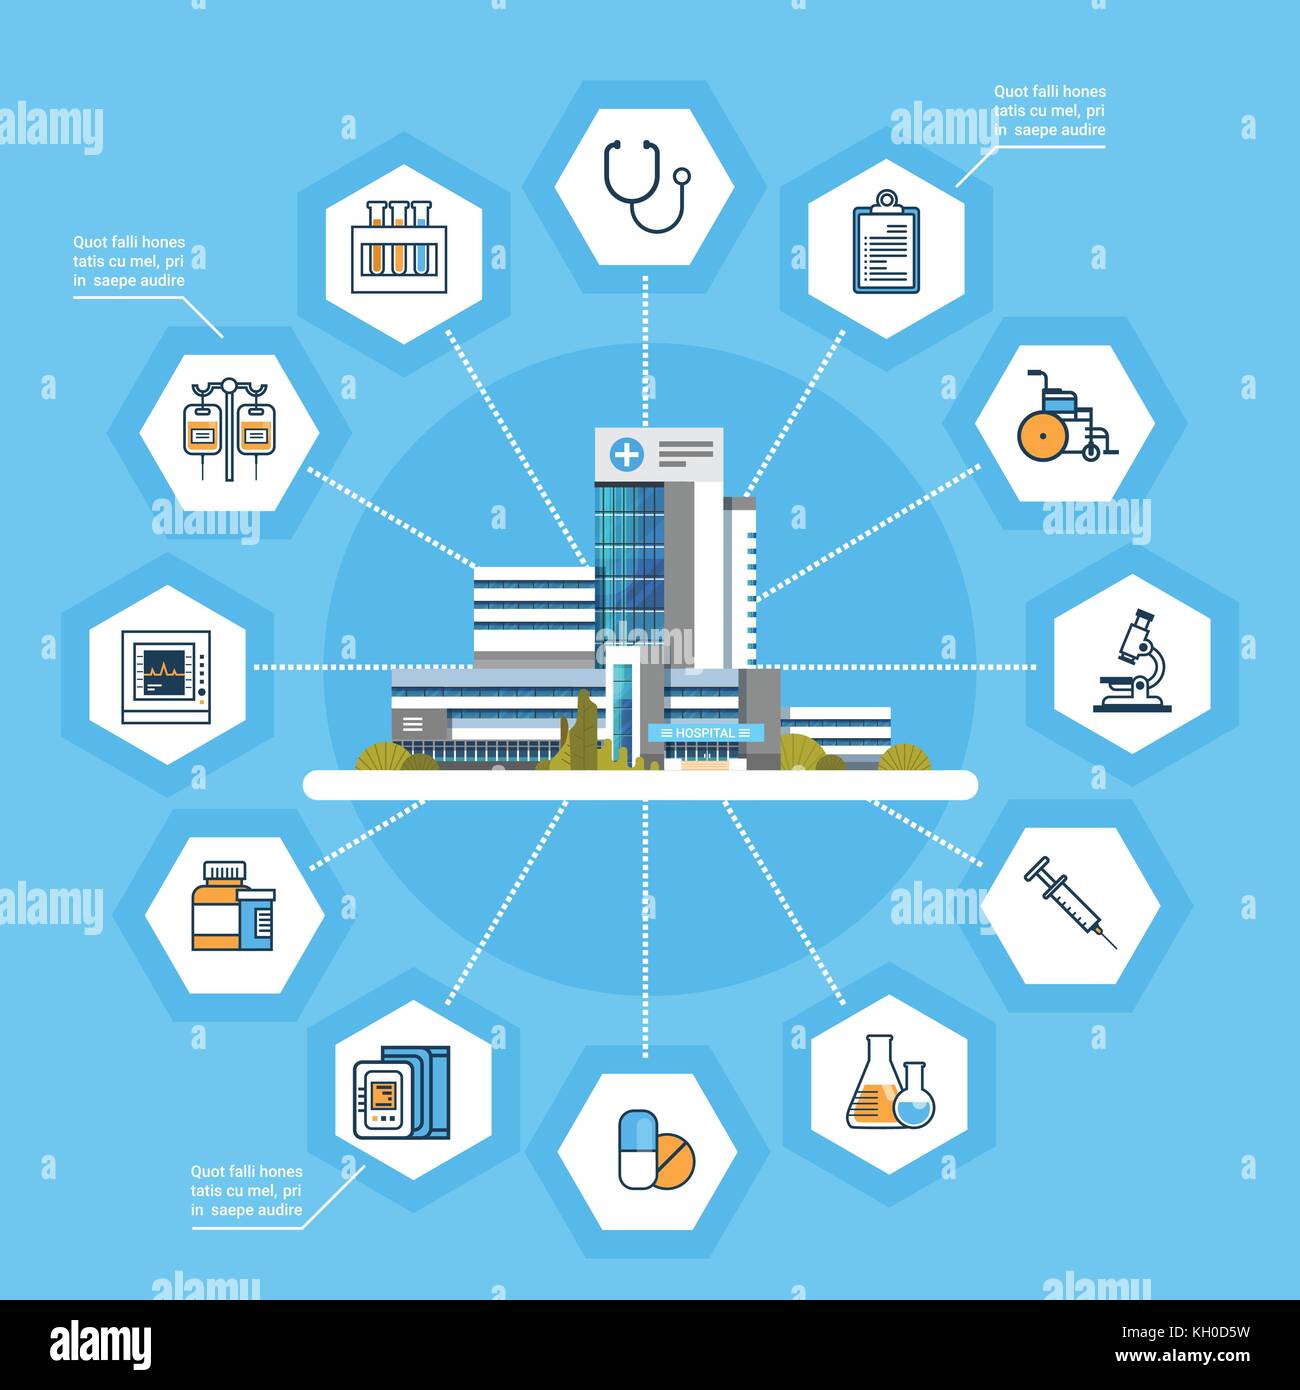 Hospital Application Interface Online Medical Treatment Icons Modern Medicine Concept Stock Vector